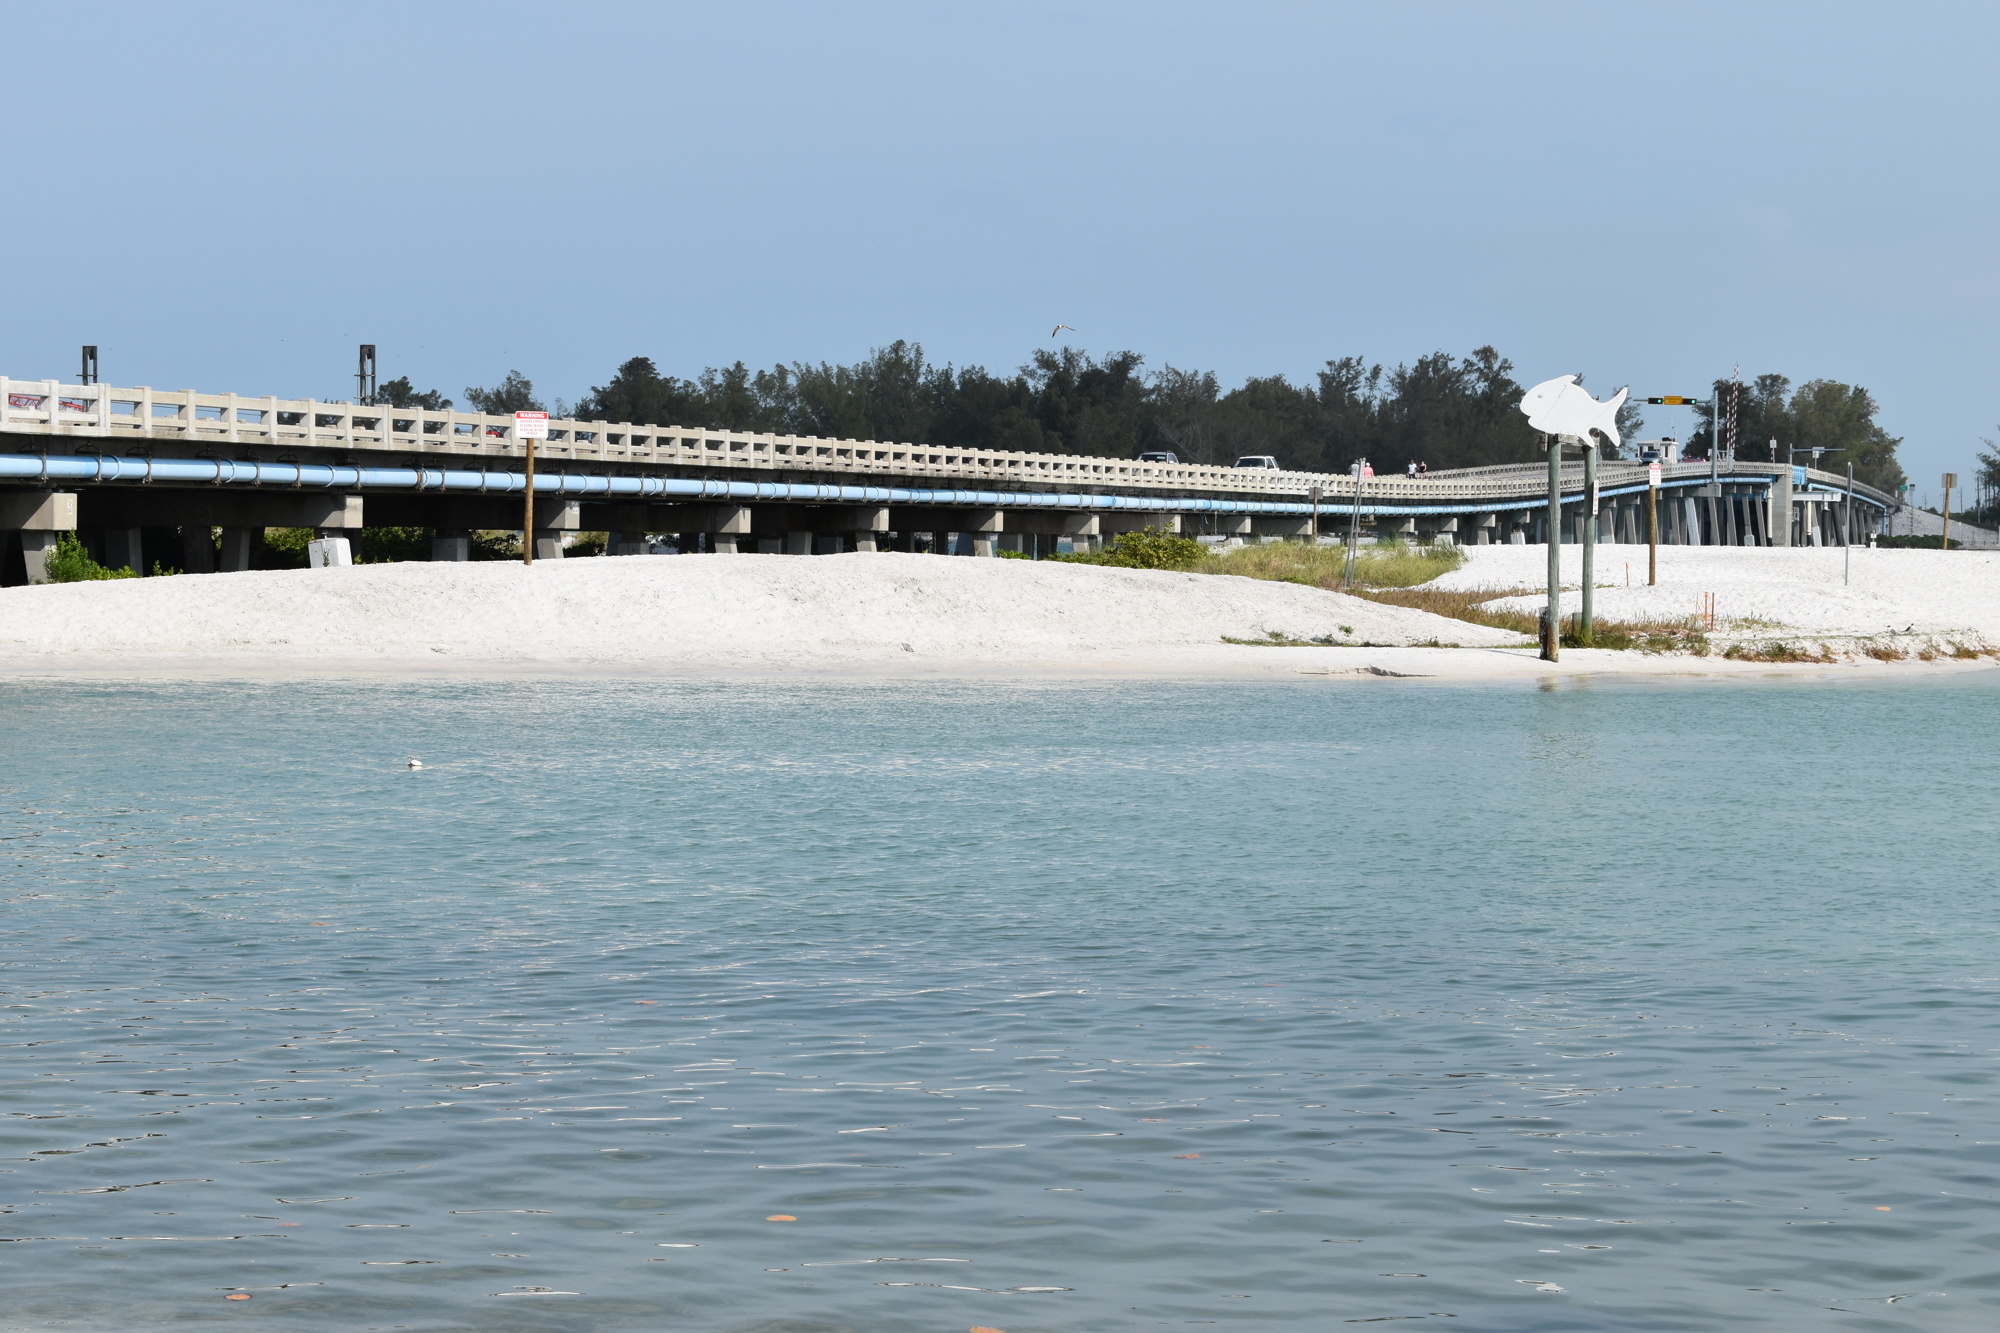 The Florida Department of Transportation has started its $2.125 million Project Development and Environment study on the Longboat Pass Bridge. The study is set to be finished by August 2023.